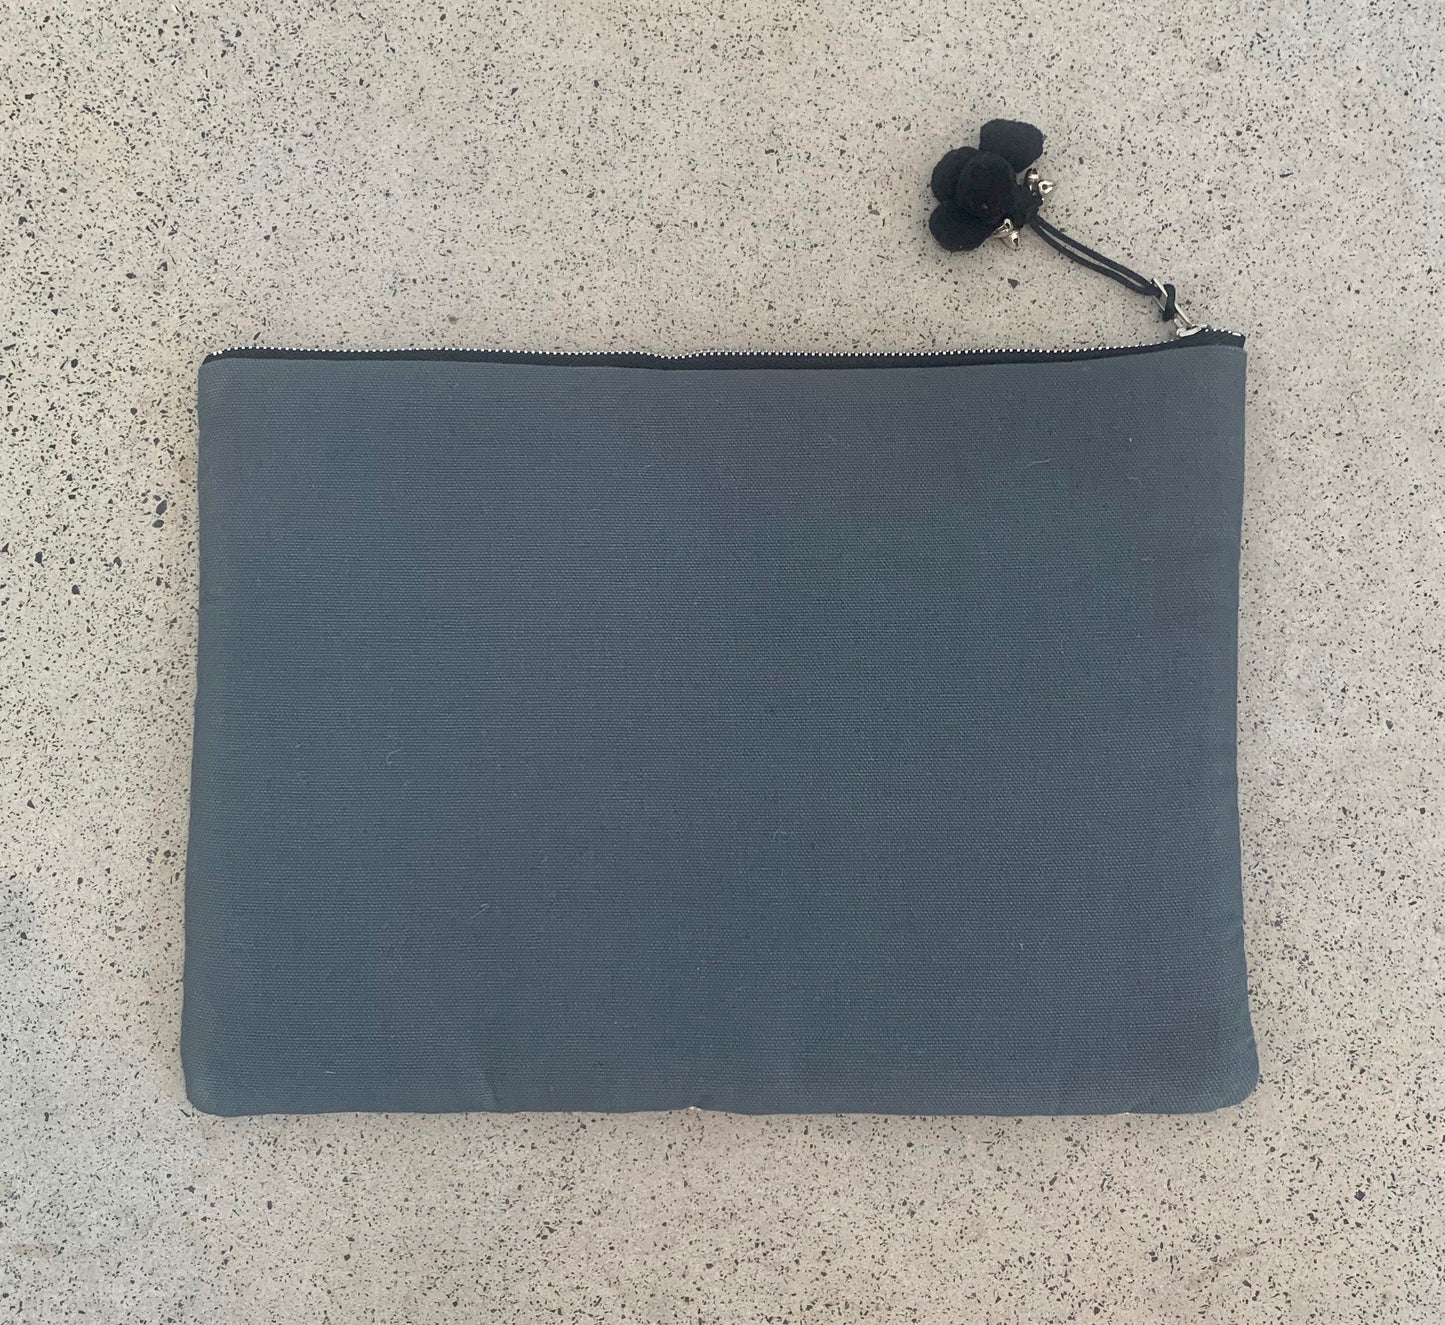 Gumnut Leaf Laptop Sleeve in Grey and Black Bags and purses WEFTshop 